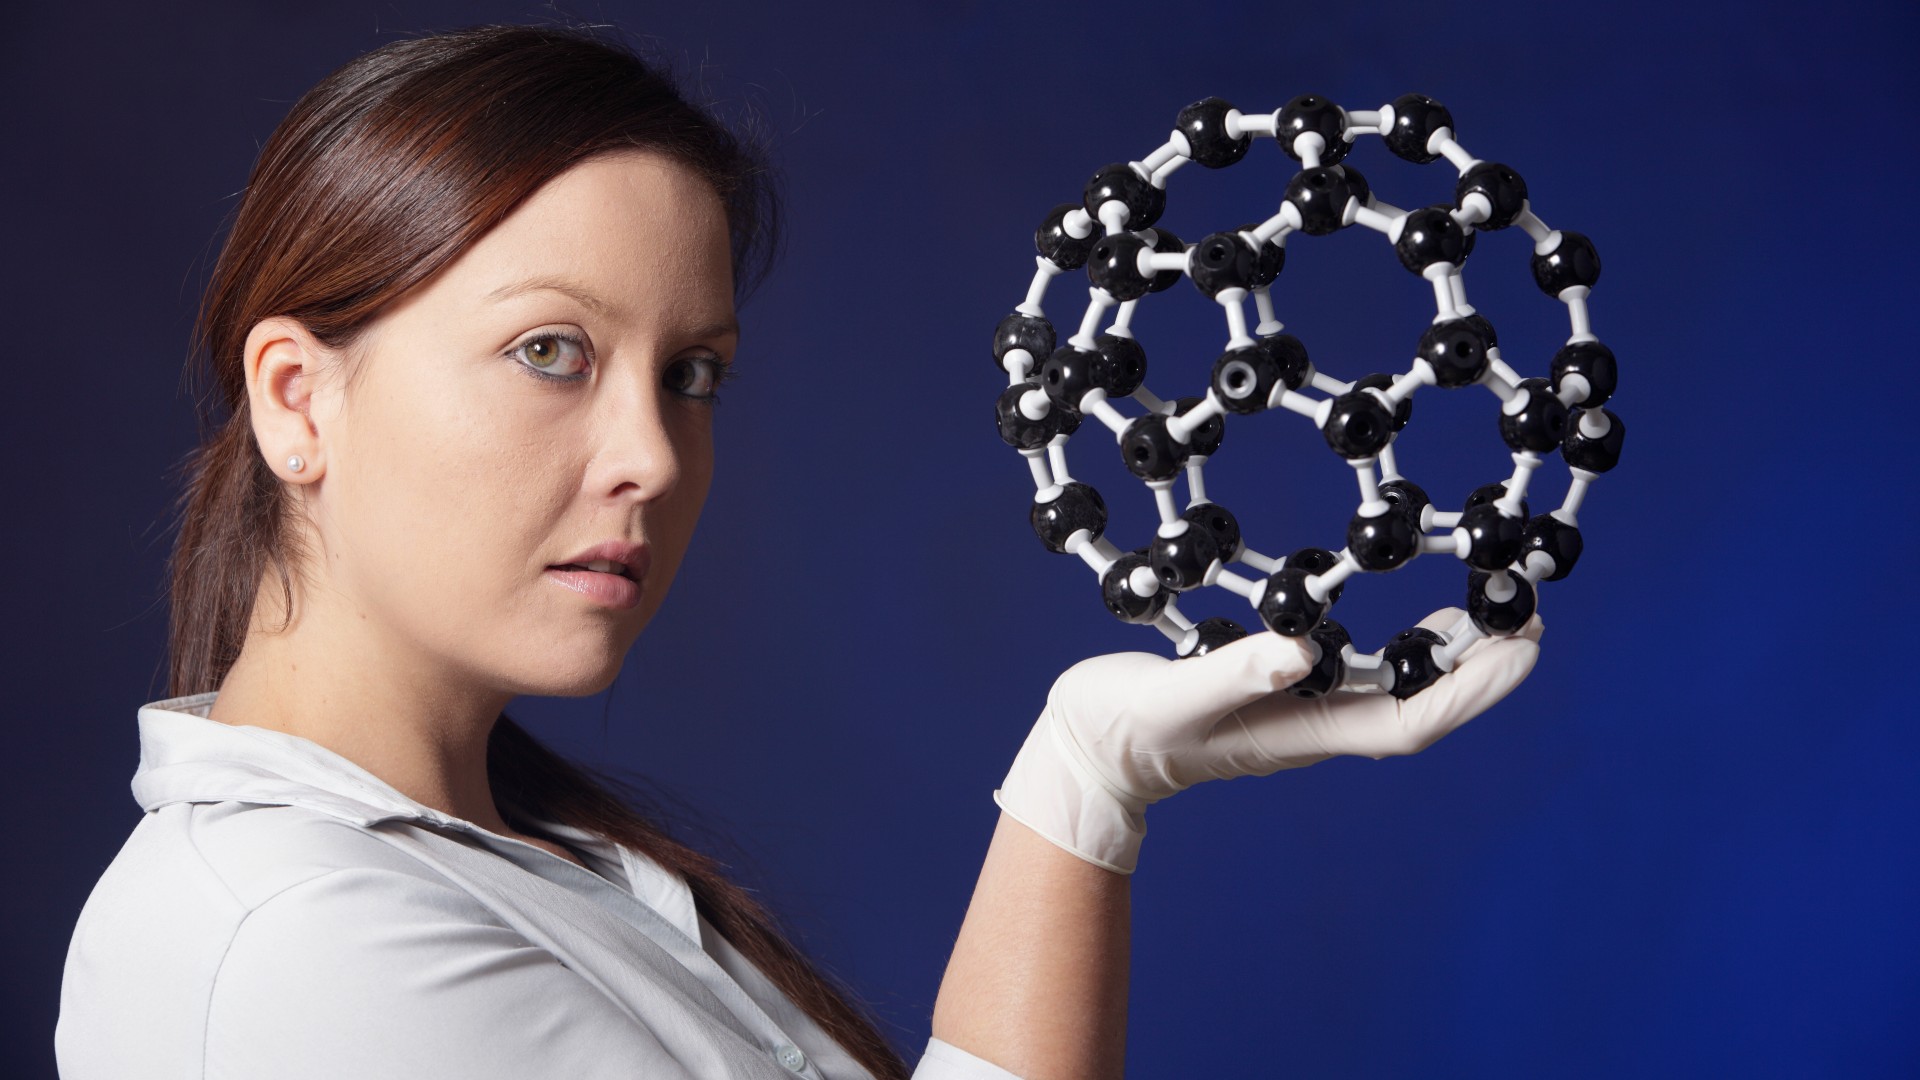 Scientist with a chemistry molecular model of a buckyball. davidf via Getty Images